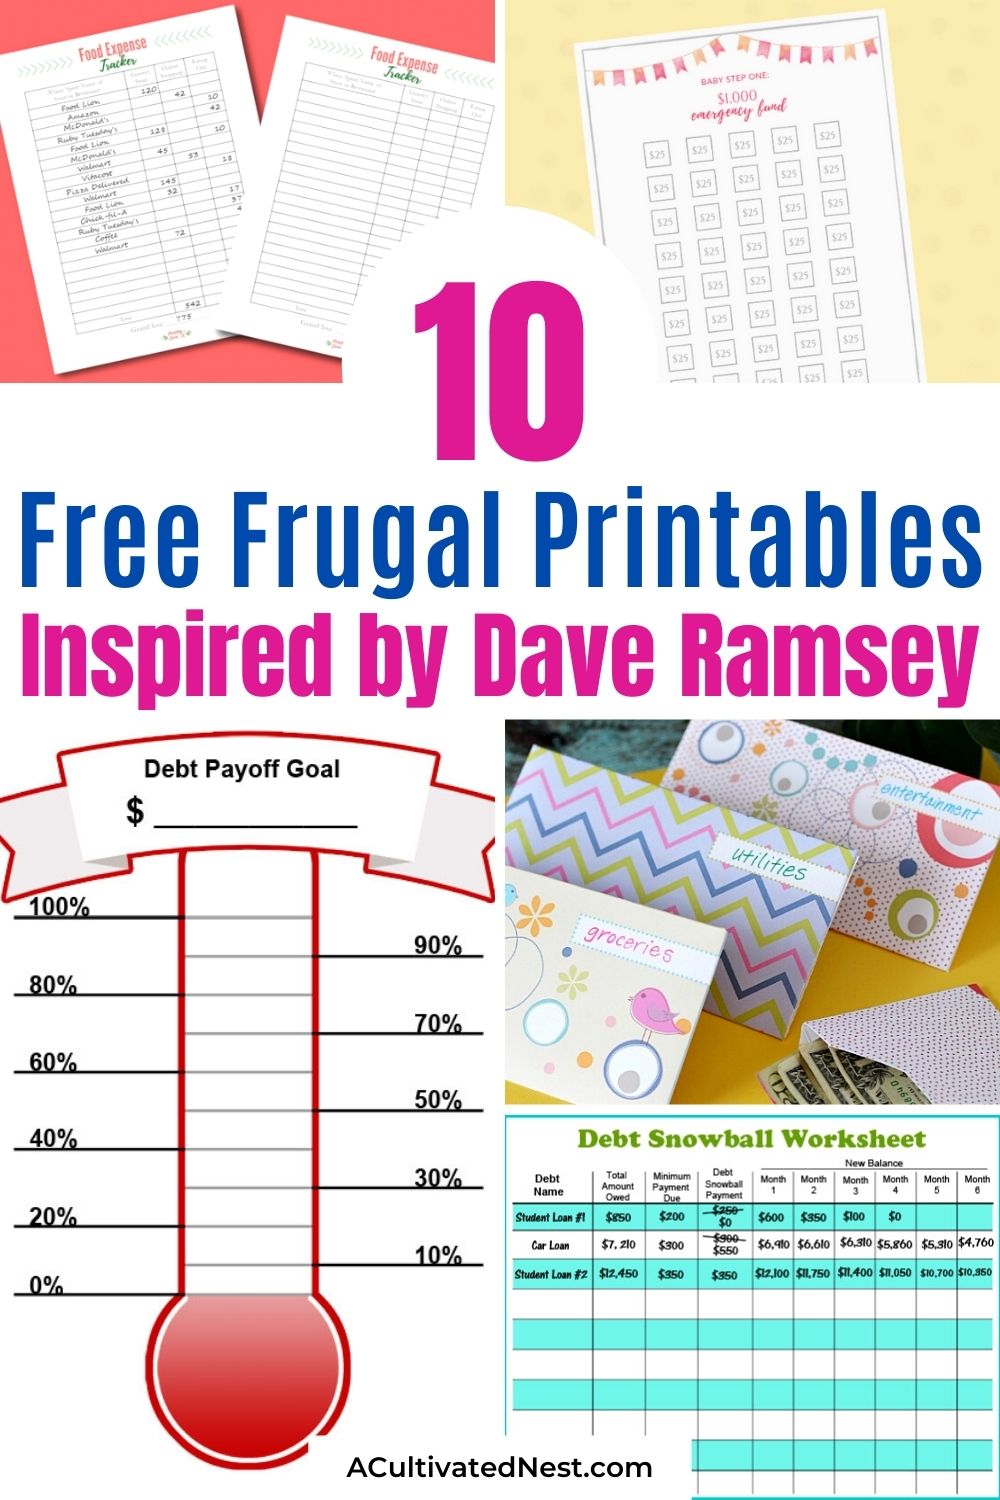 10 Free Budgeting Printables Inspired by Dave Ramsey- If you want to save money, get your finances in order, or pay down debt, then you need to check out these 10 free budgeting printables inspired by Dave Ramsey! | #freePrintable #budgetBinder #budgetPrintables #personalFinance #ACultivatedNest